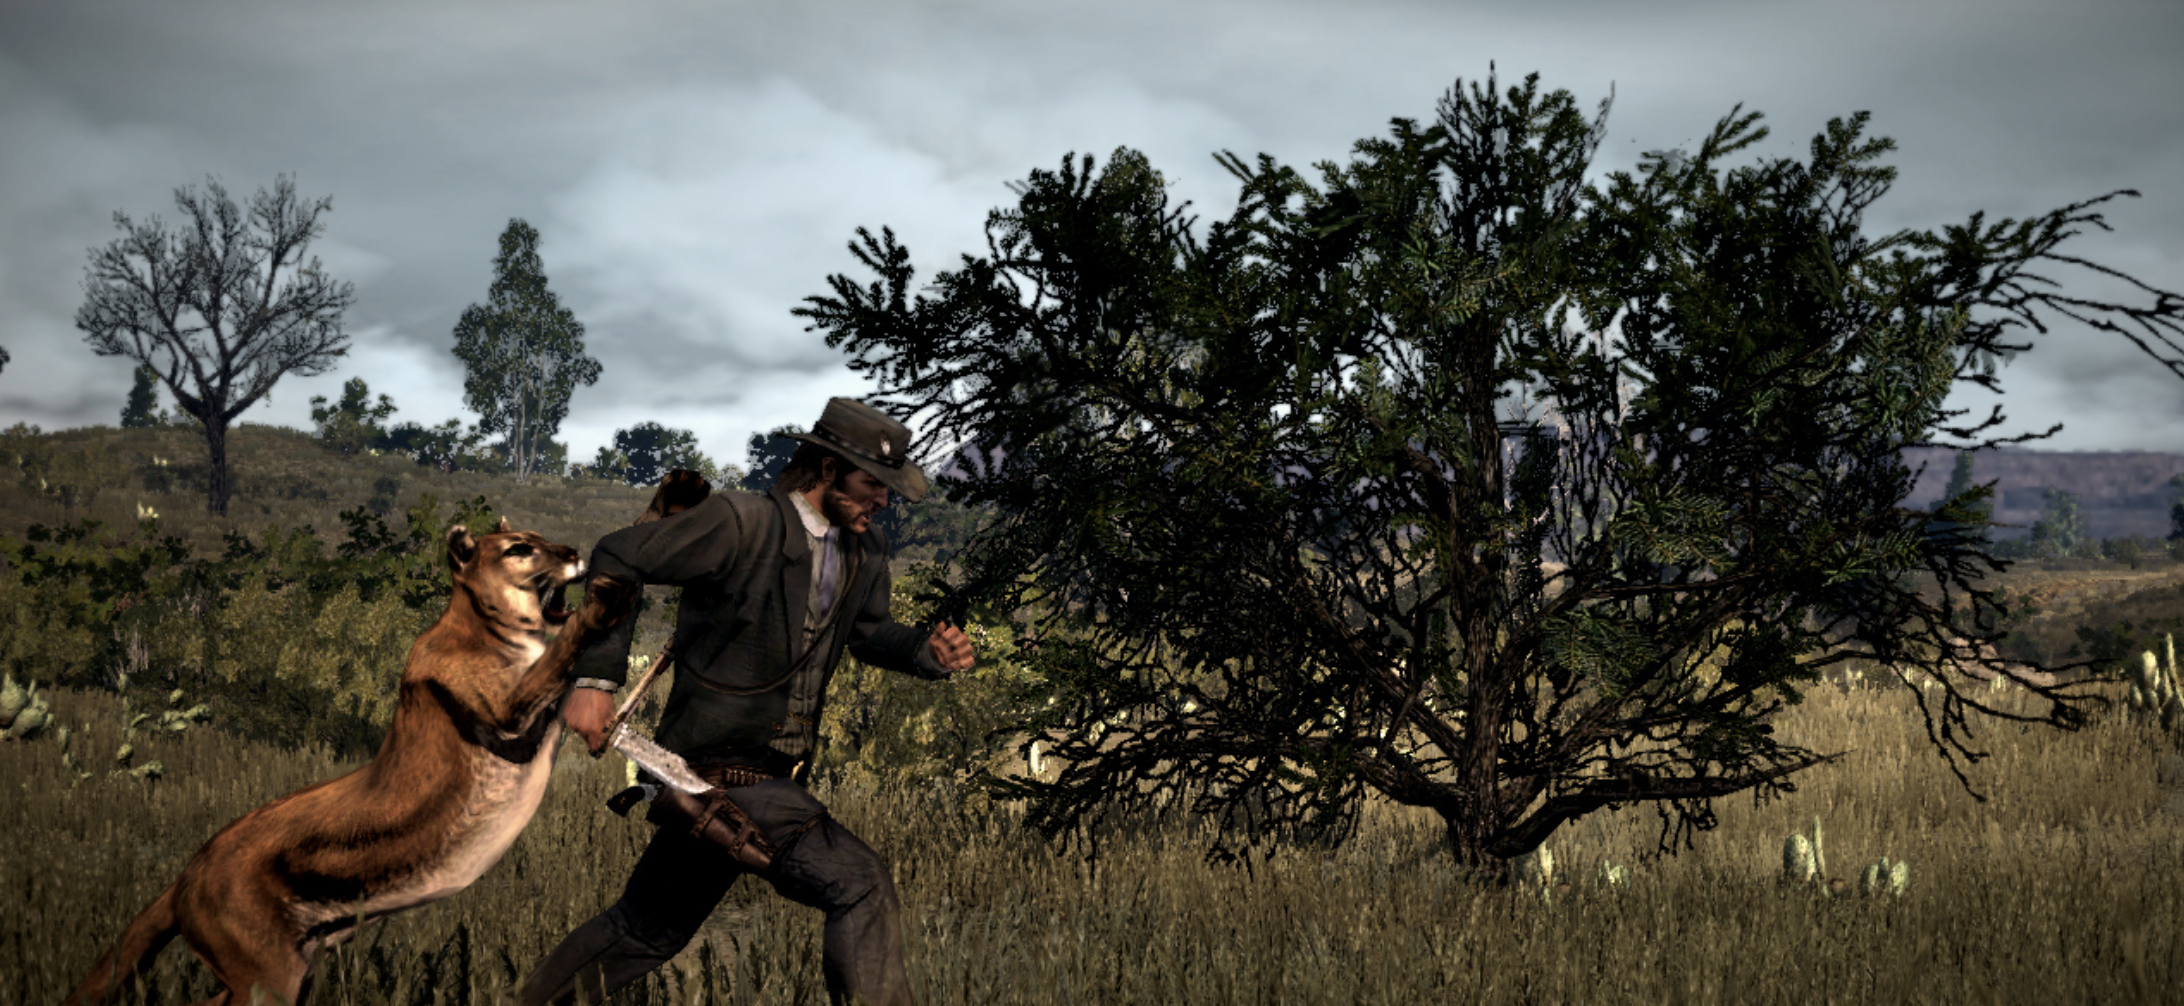 John Marston attacked by leopard. Red Dead Redemption Gameplay screengrab